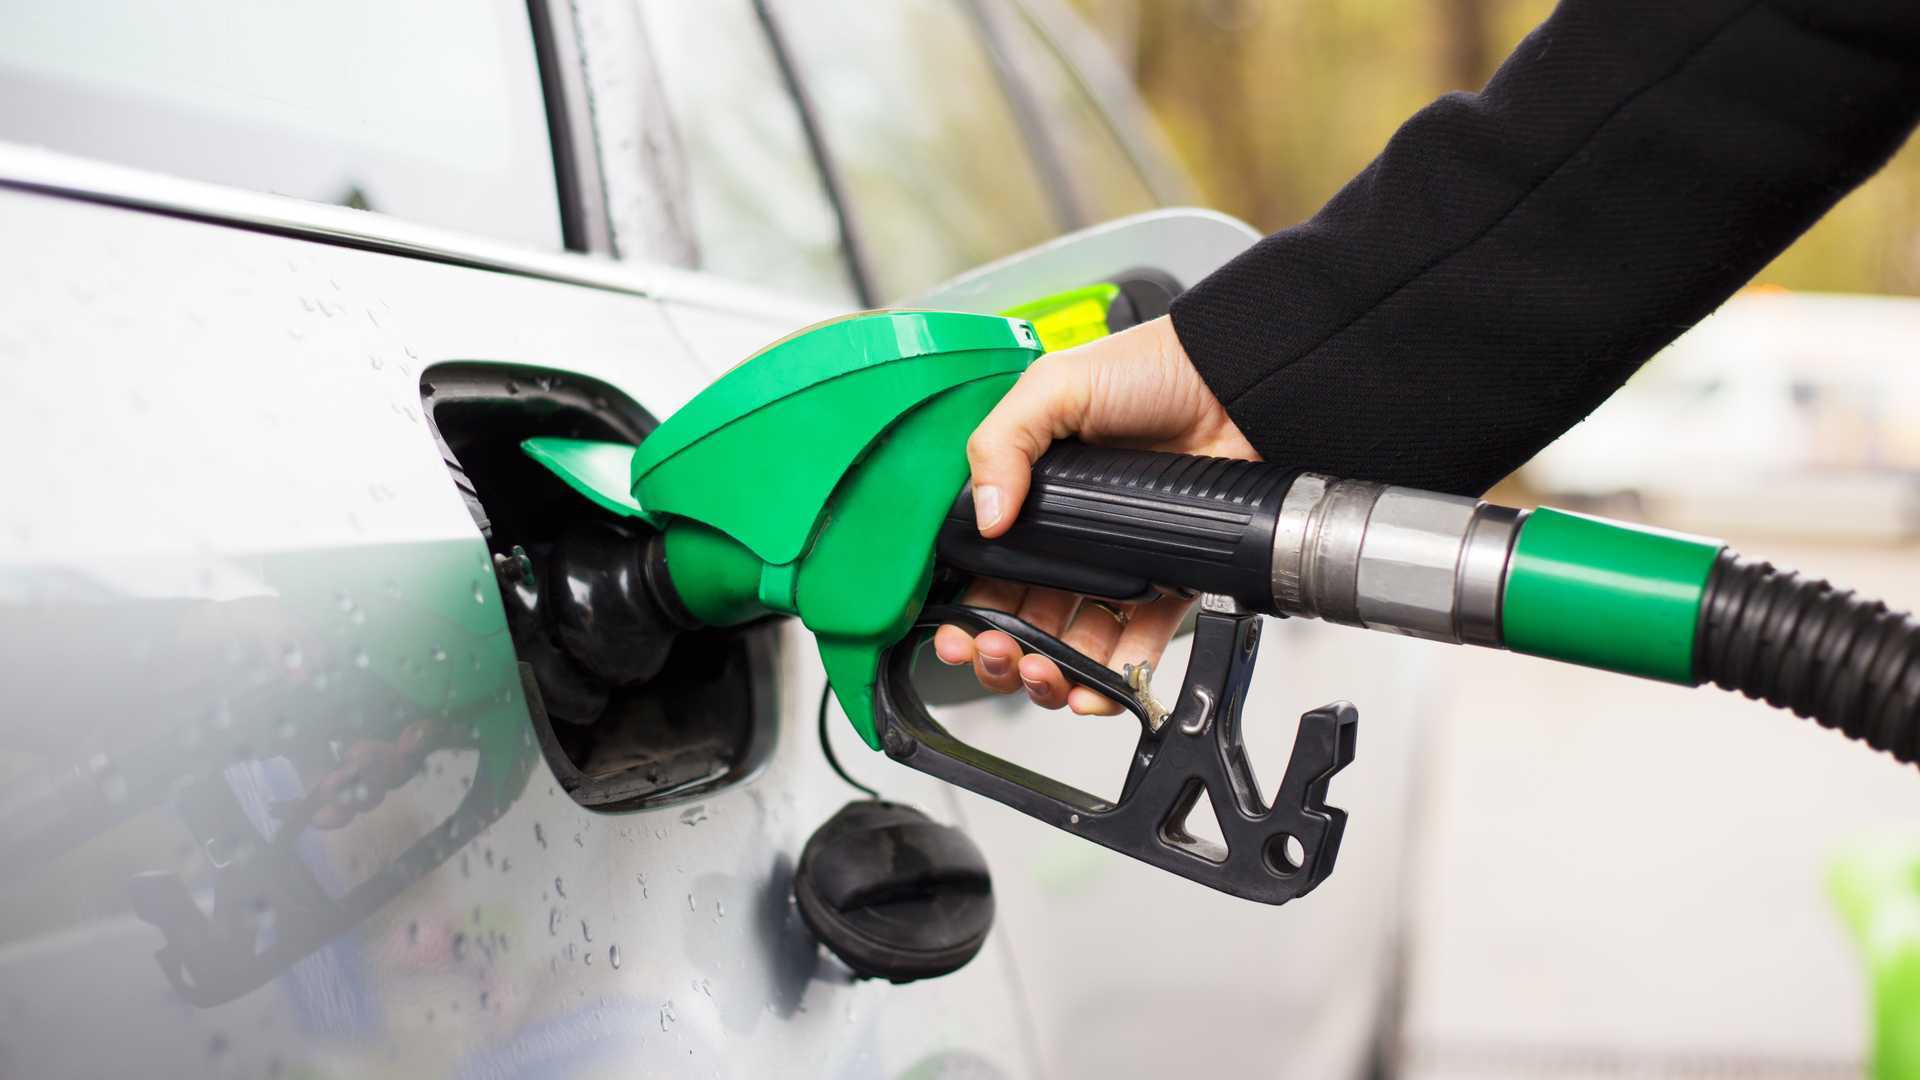 hand-holding-fuel-pump-and-refilling-car-at-petrol-station.jpg